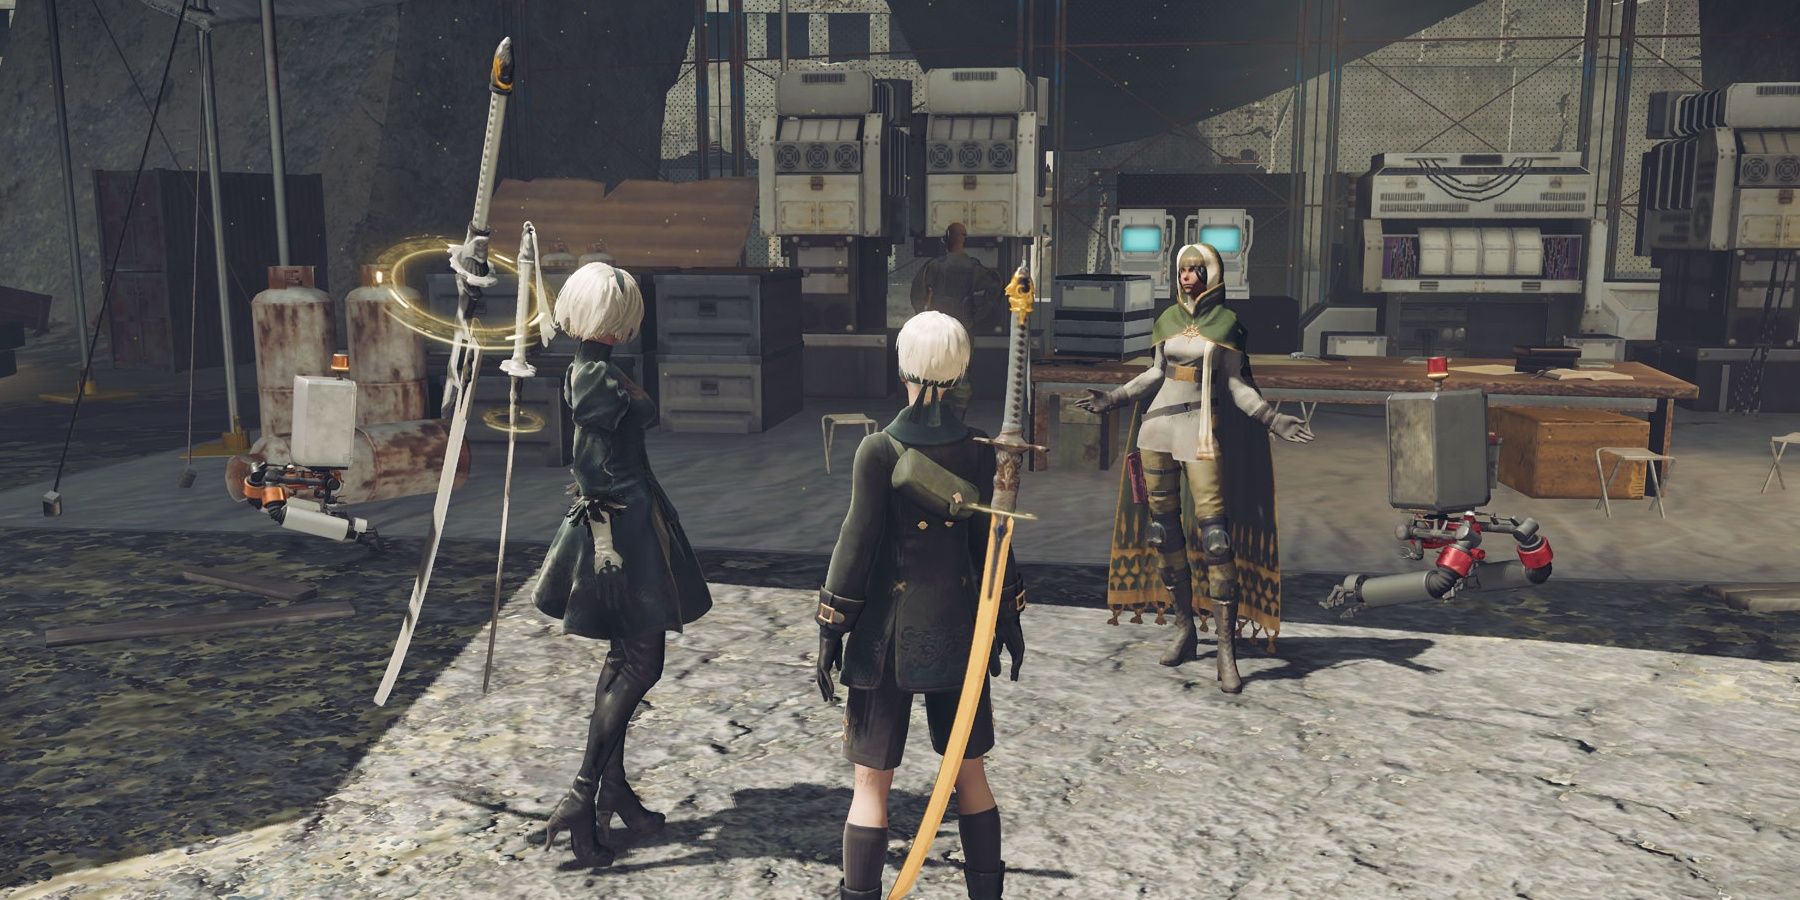 NieR: Automata - 9S and 2B talking to the Vendor